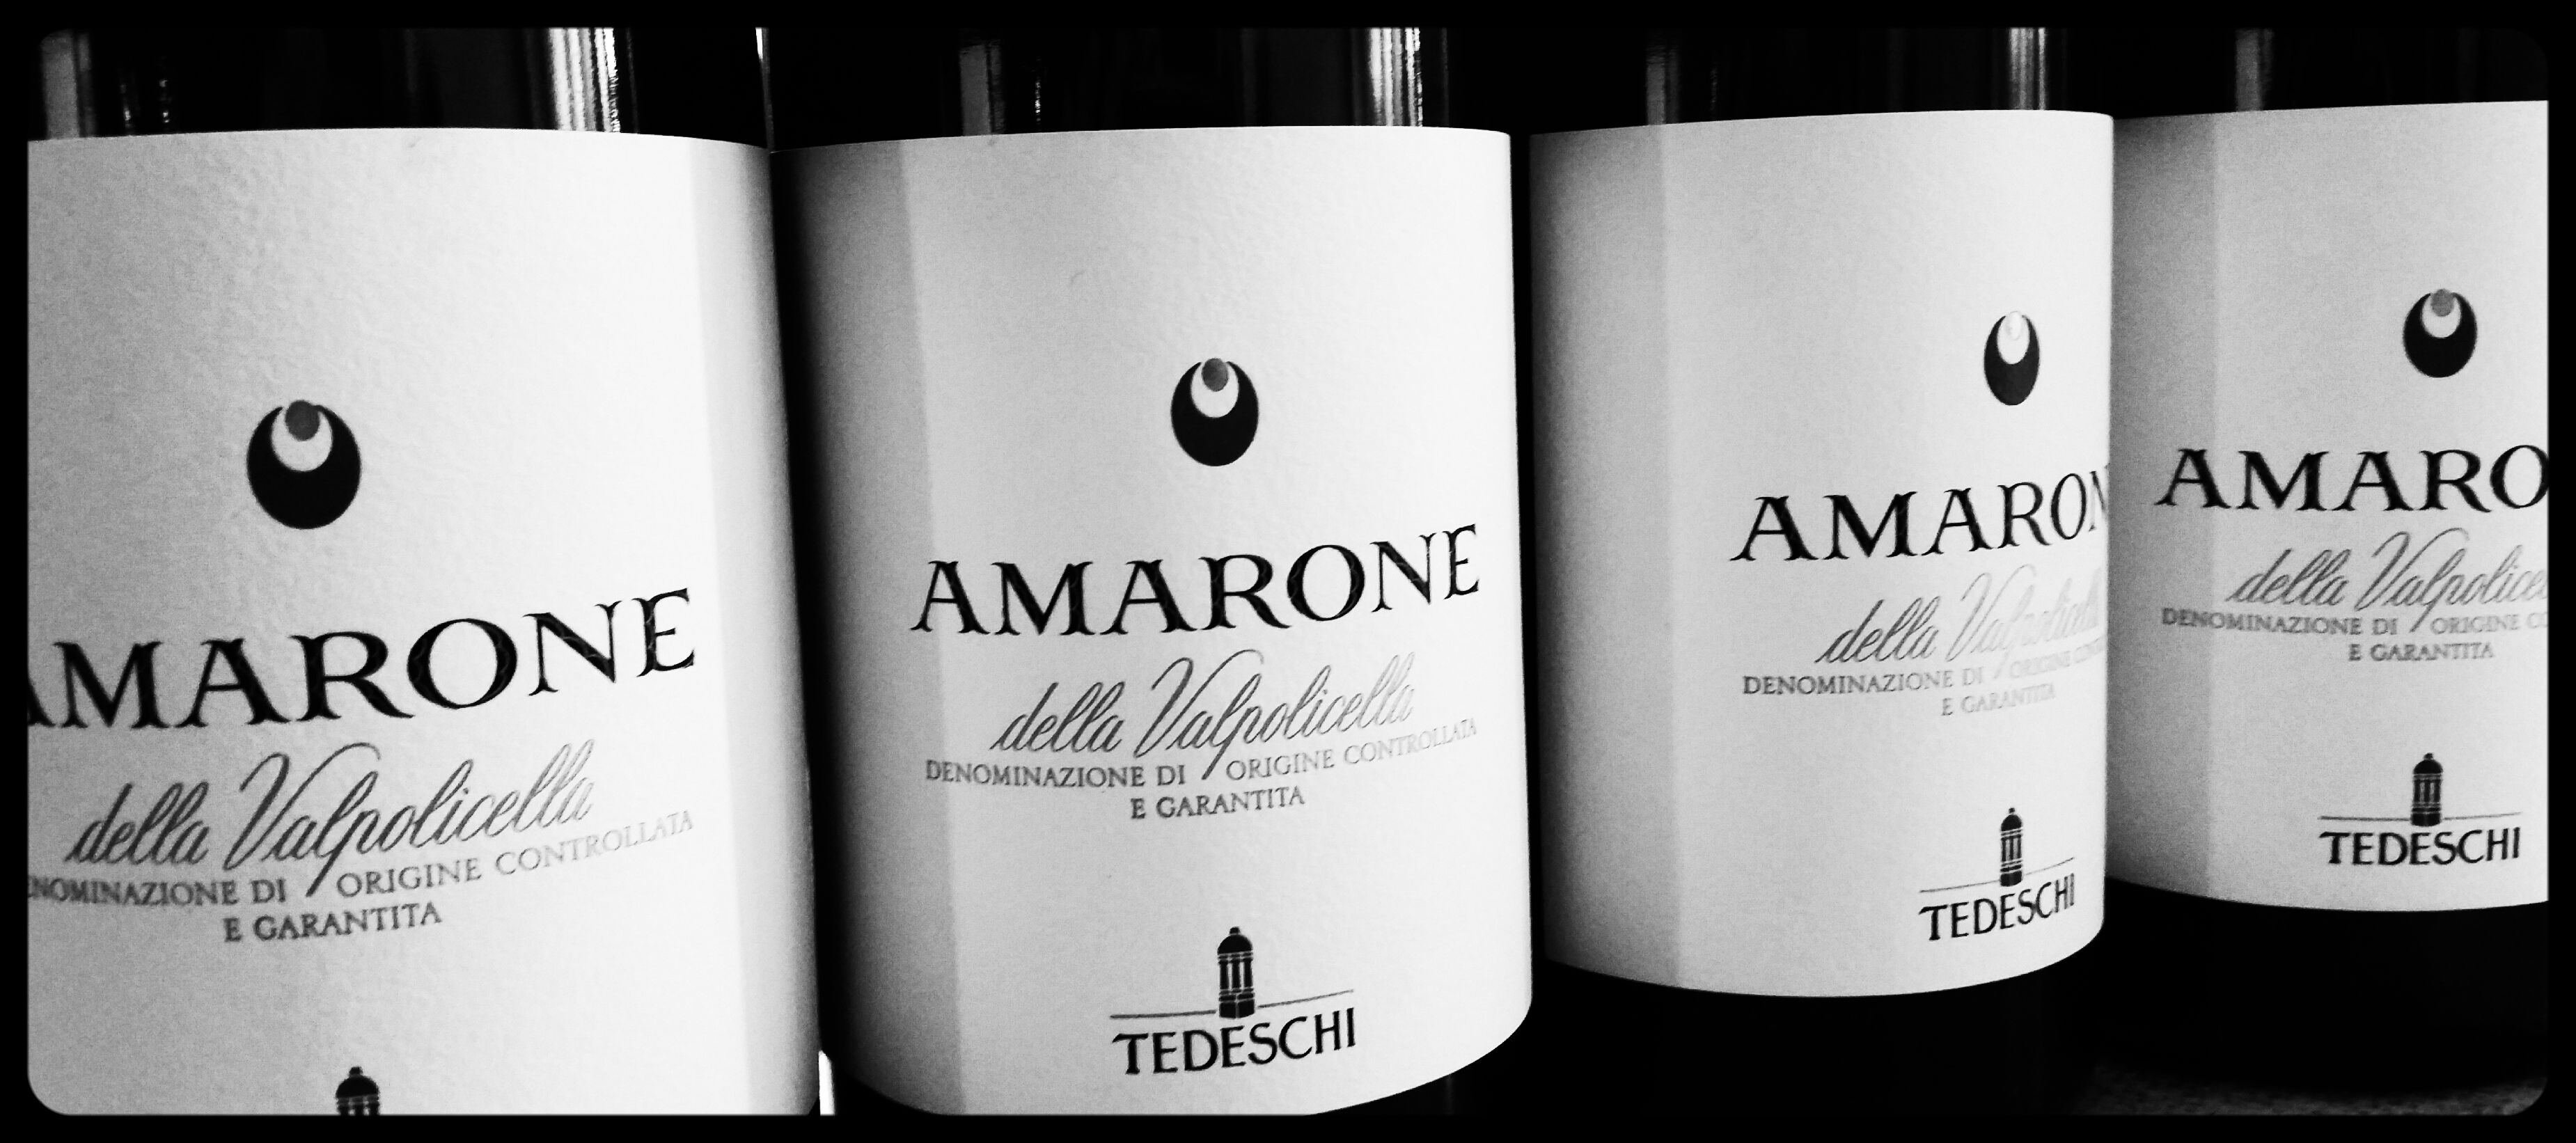 Vino at the Chateau: It’s a crime, you’ve had too much bad wine, there’s Amarone!